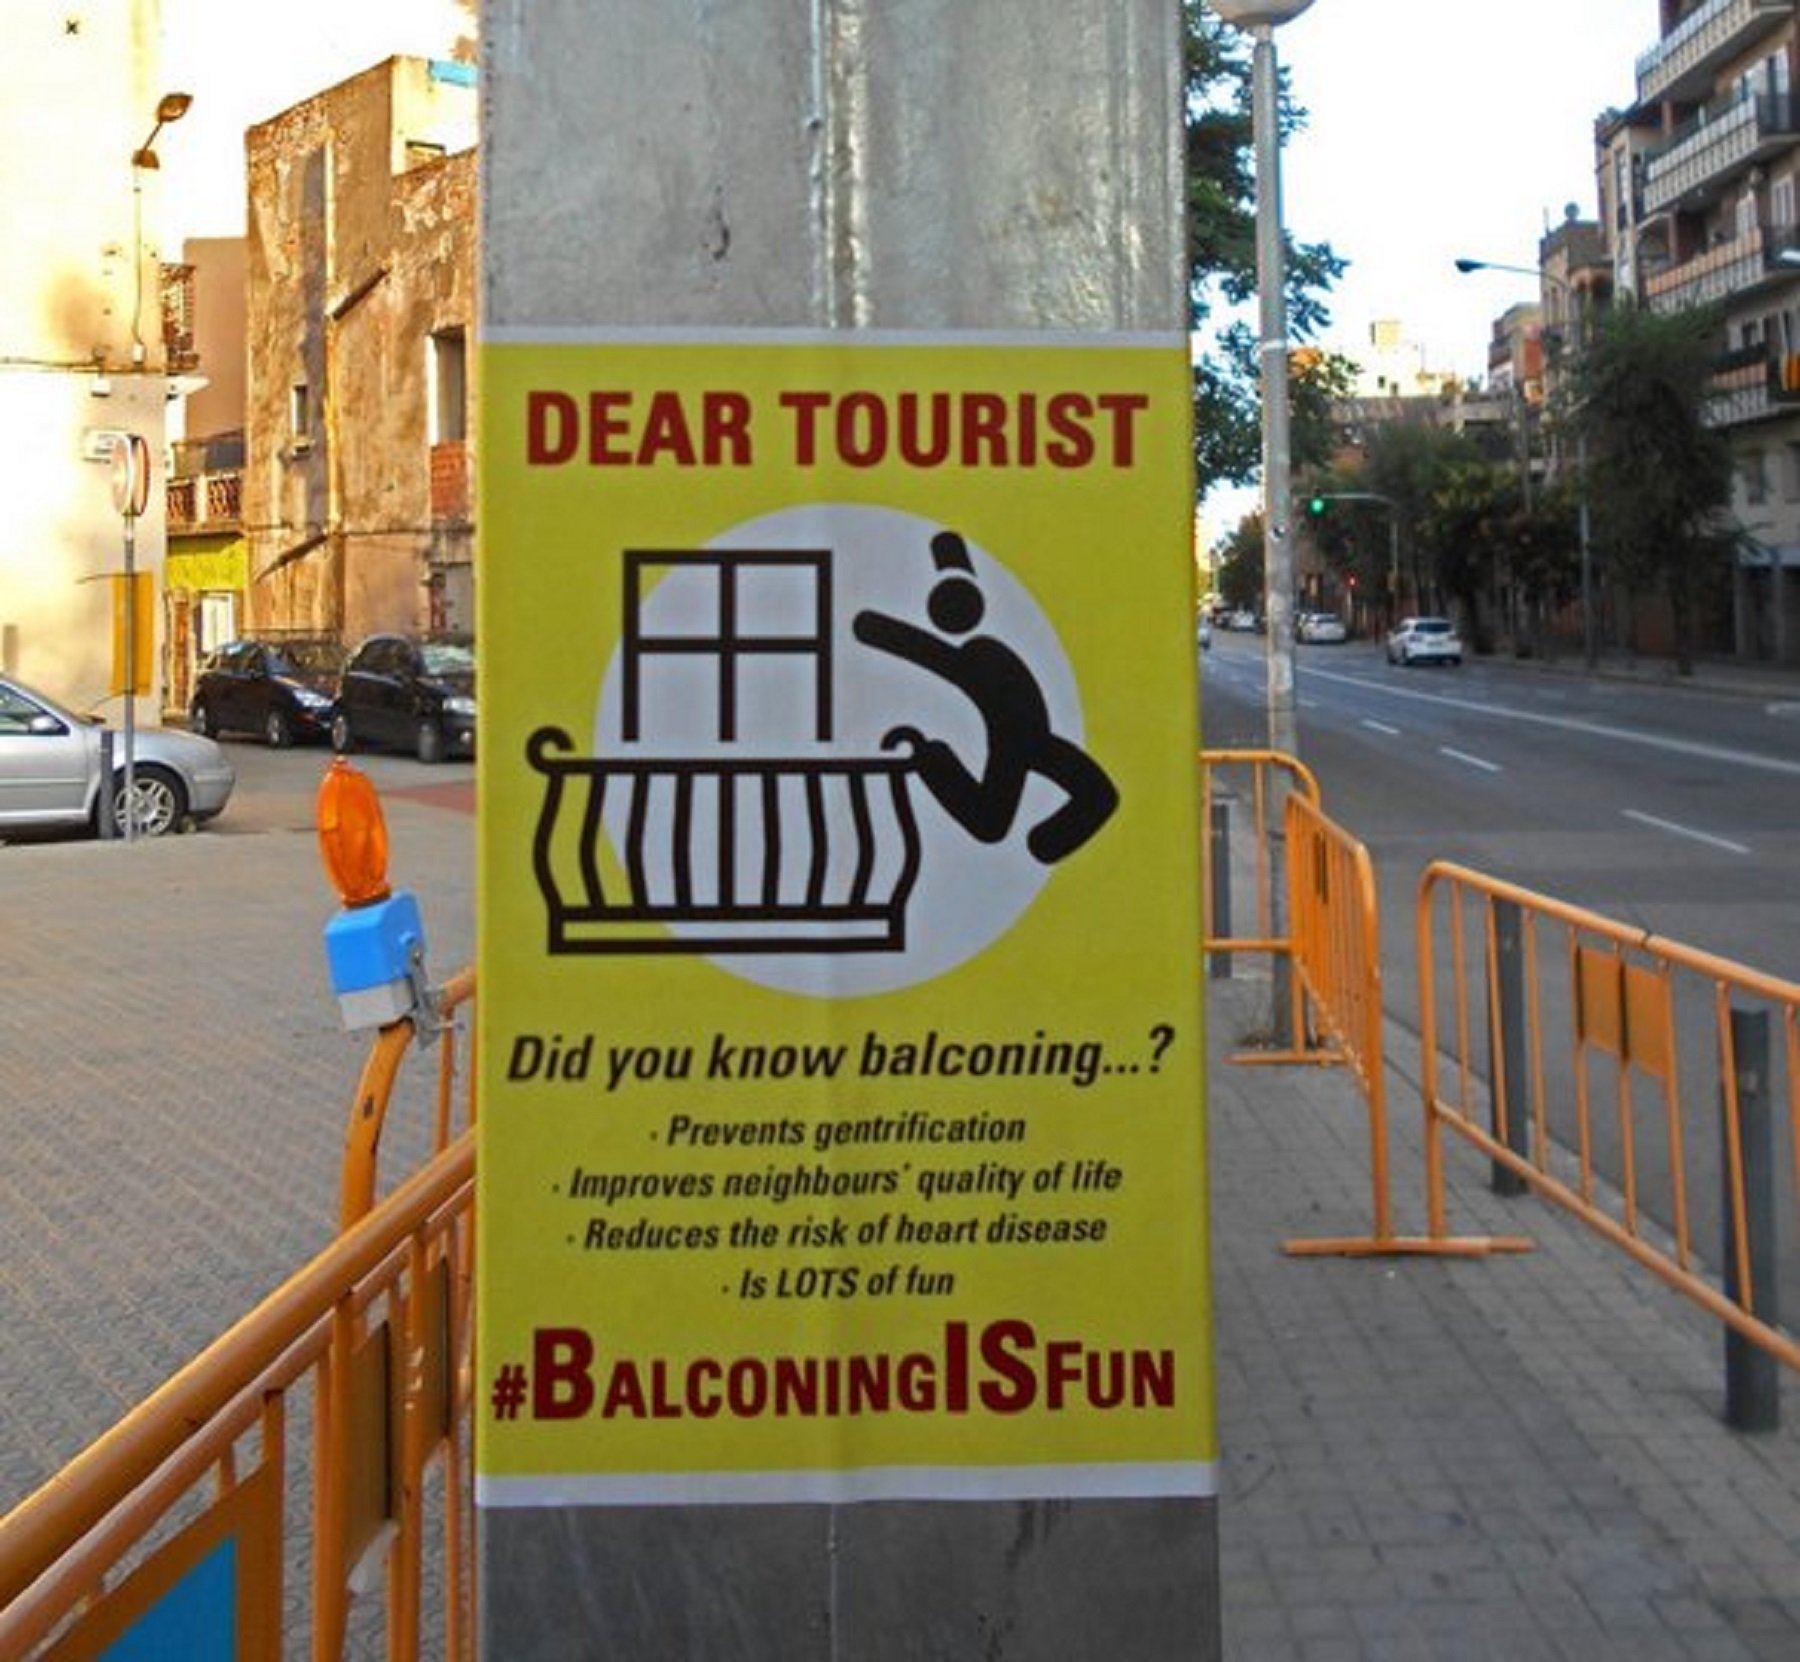 Anti-tourist 'balconing' posters appear around Barcelona